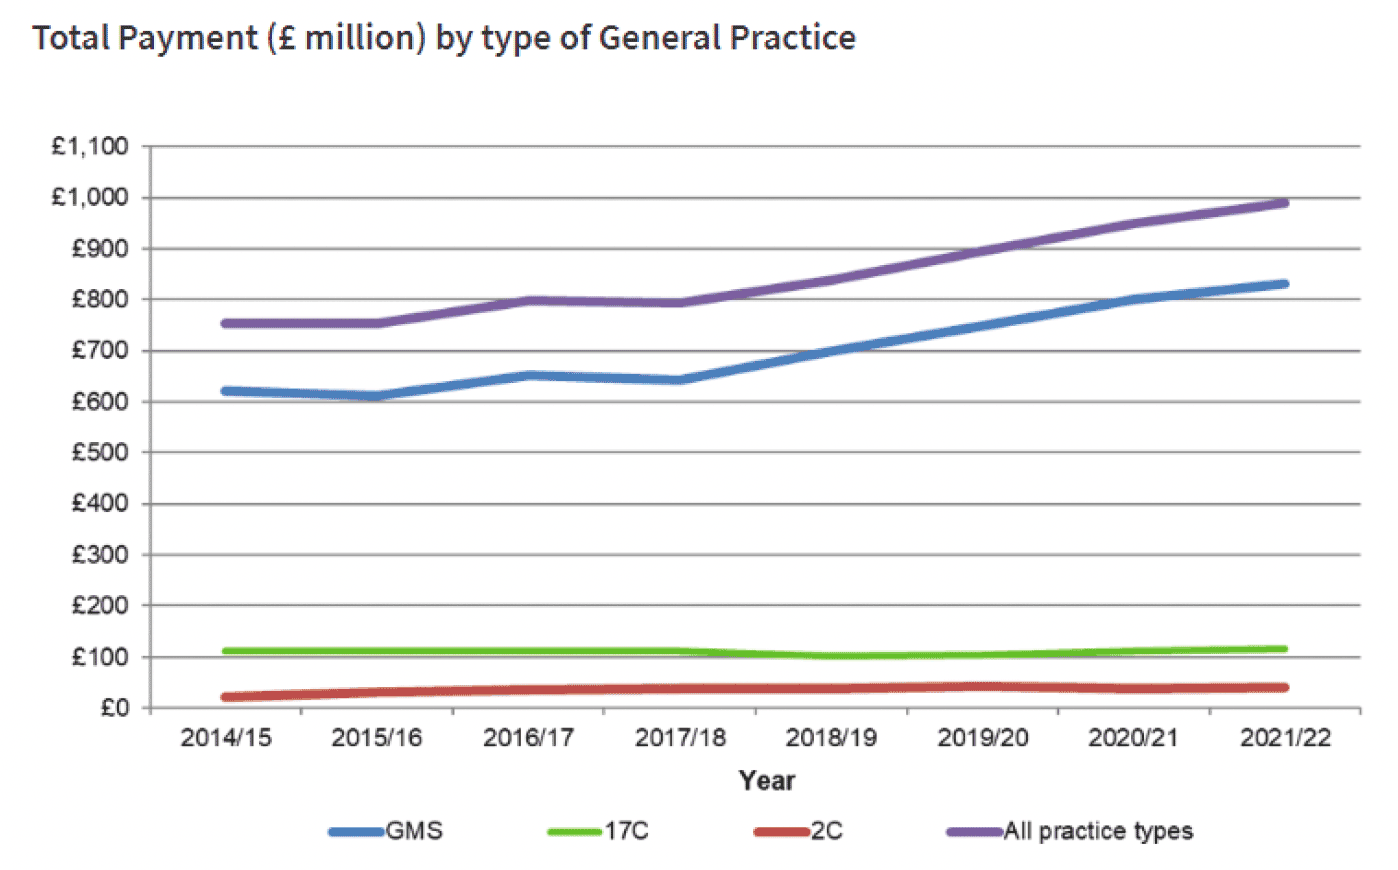 This line graph displays the total payment for General Practice by their type, according to the statistical information provided in paragraphs 141 to 145